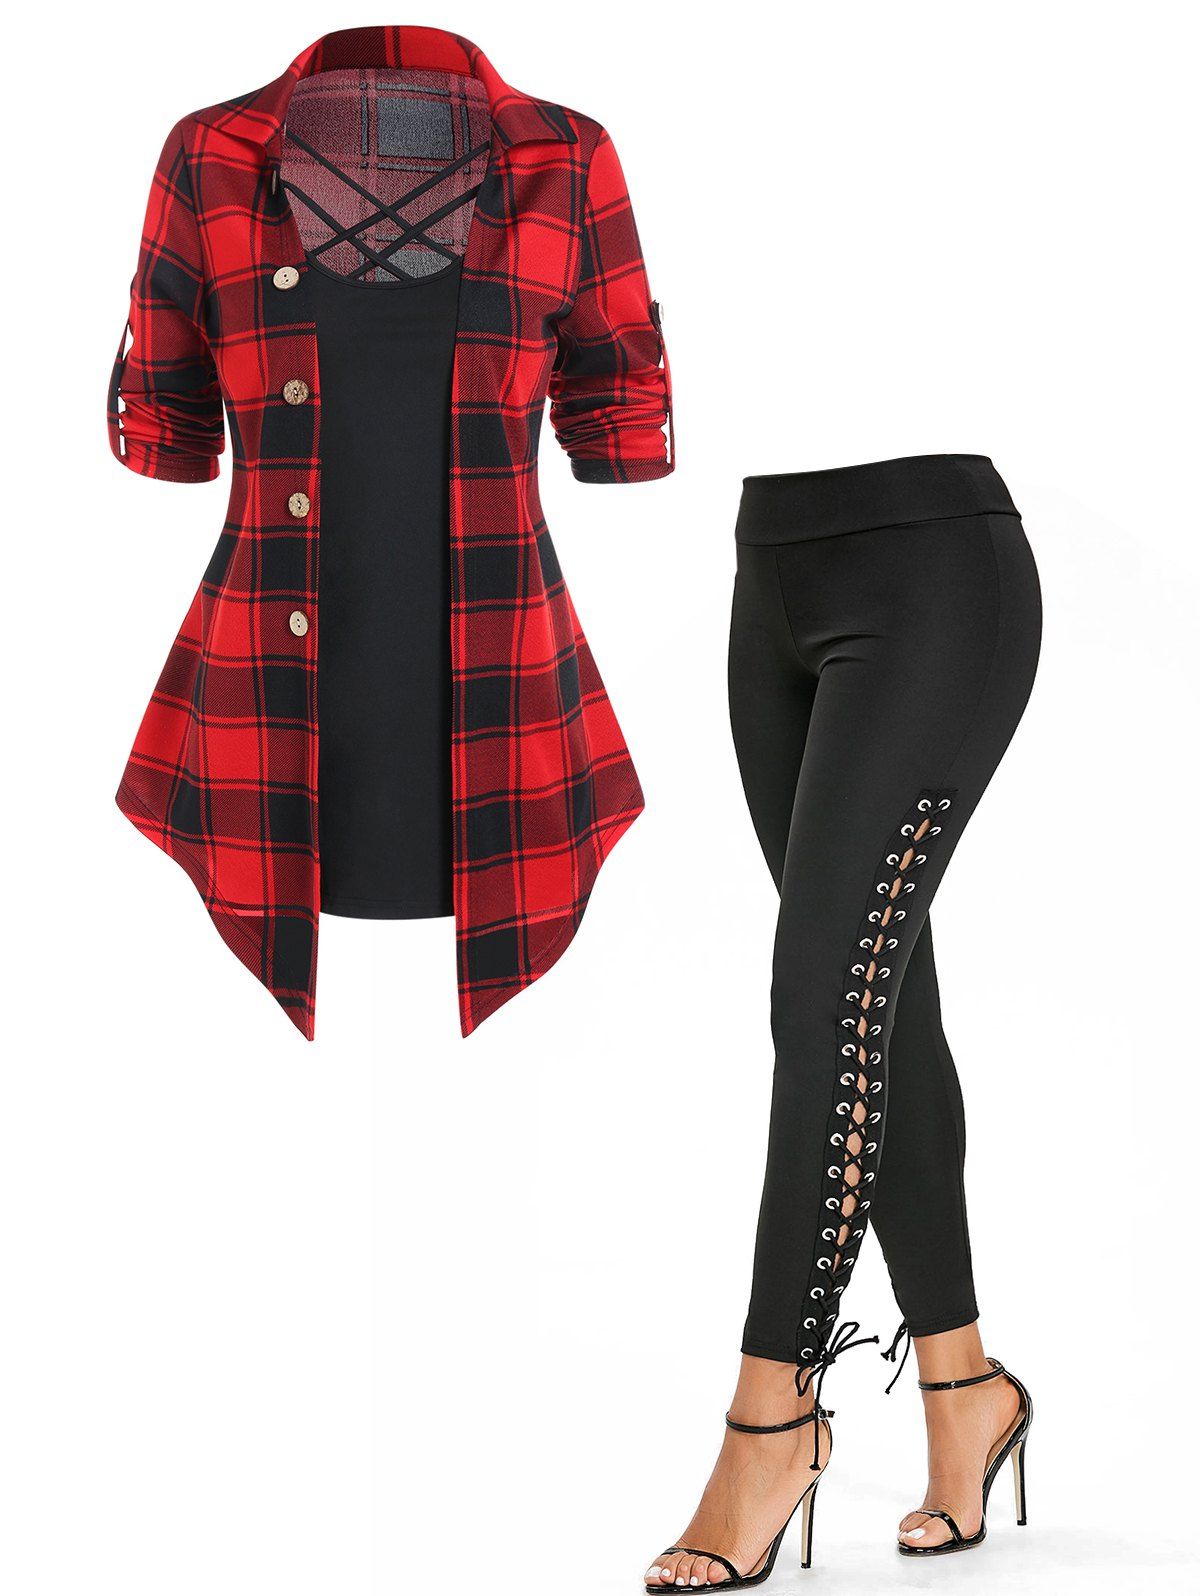 Plaid Print Asymmetric Pointed Hem Mock Button Long Sleeve Faux Twinset T-shirt And Lace Up Skinny Pants Outfit - multicolor S